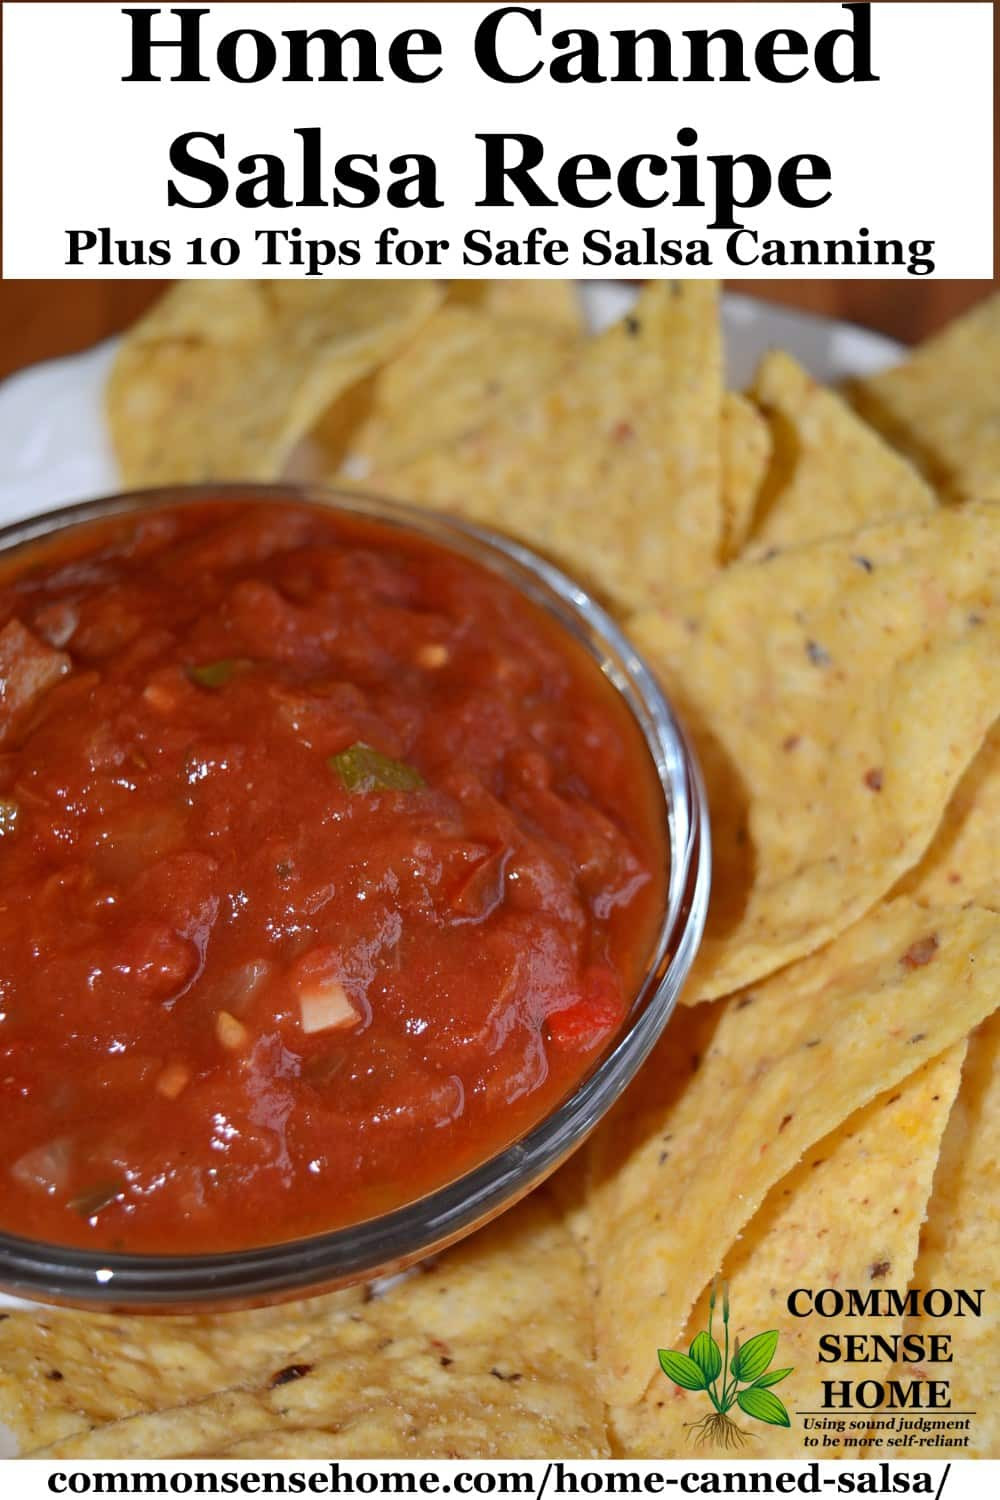 Best Salsa Recipe For Canning
 Home Canned Salsa Recipe Plus 10 Tips for Canning Salsa